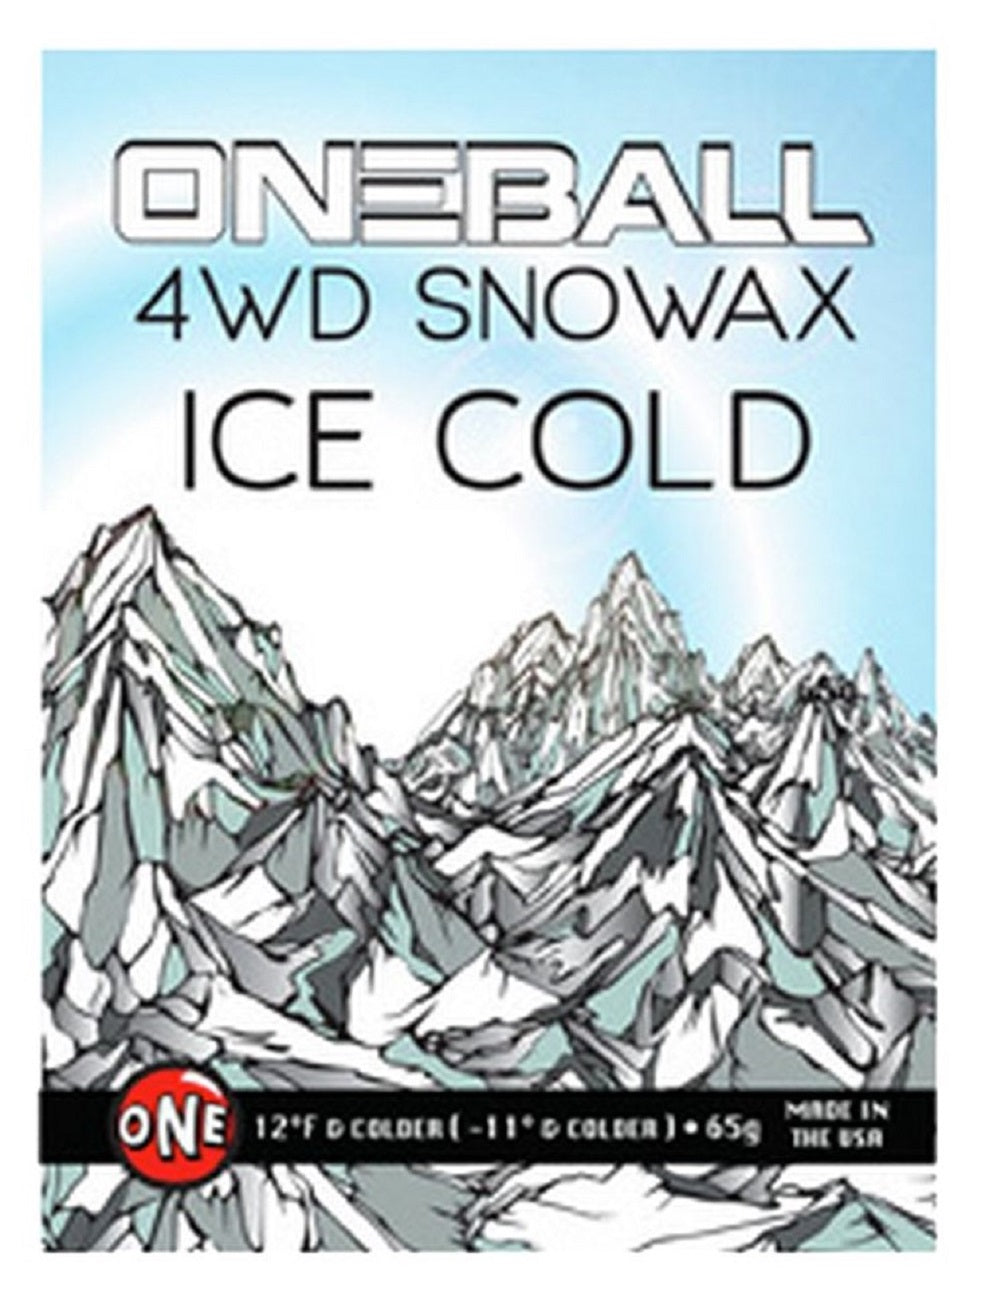 One Ball Jay 4WD Wax Cold (165g)